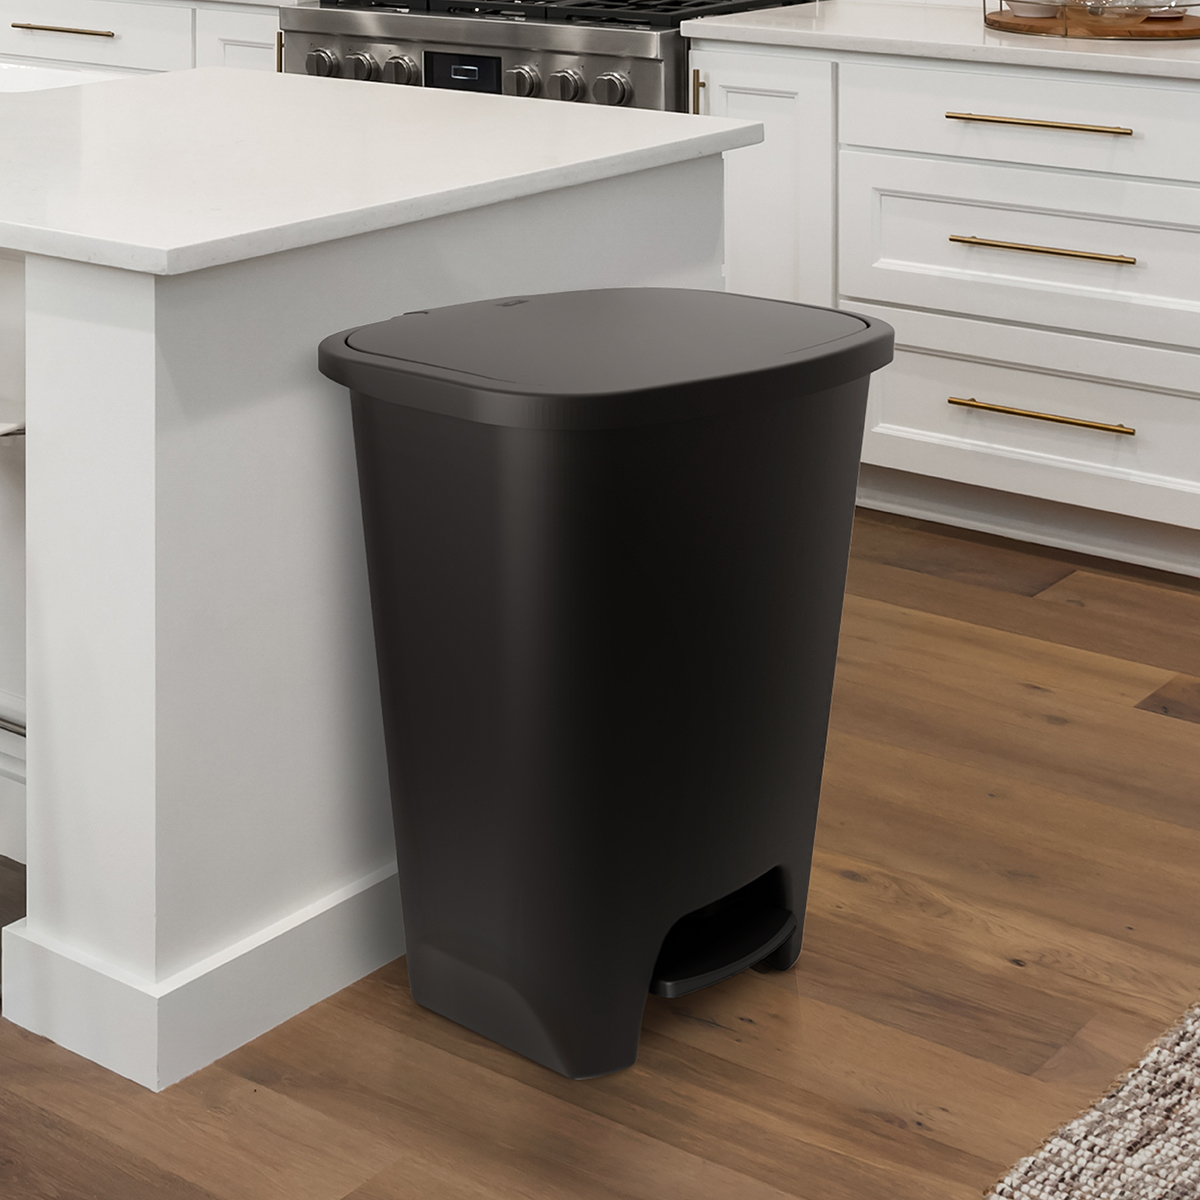 Glad XL Trash Can, Plastic Step-on Kitchen Trash Can, with Clorox Odor Defense, Black - image 3 of 4